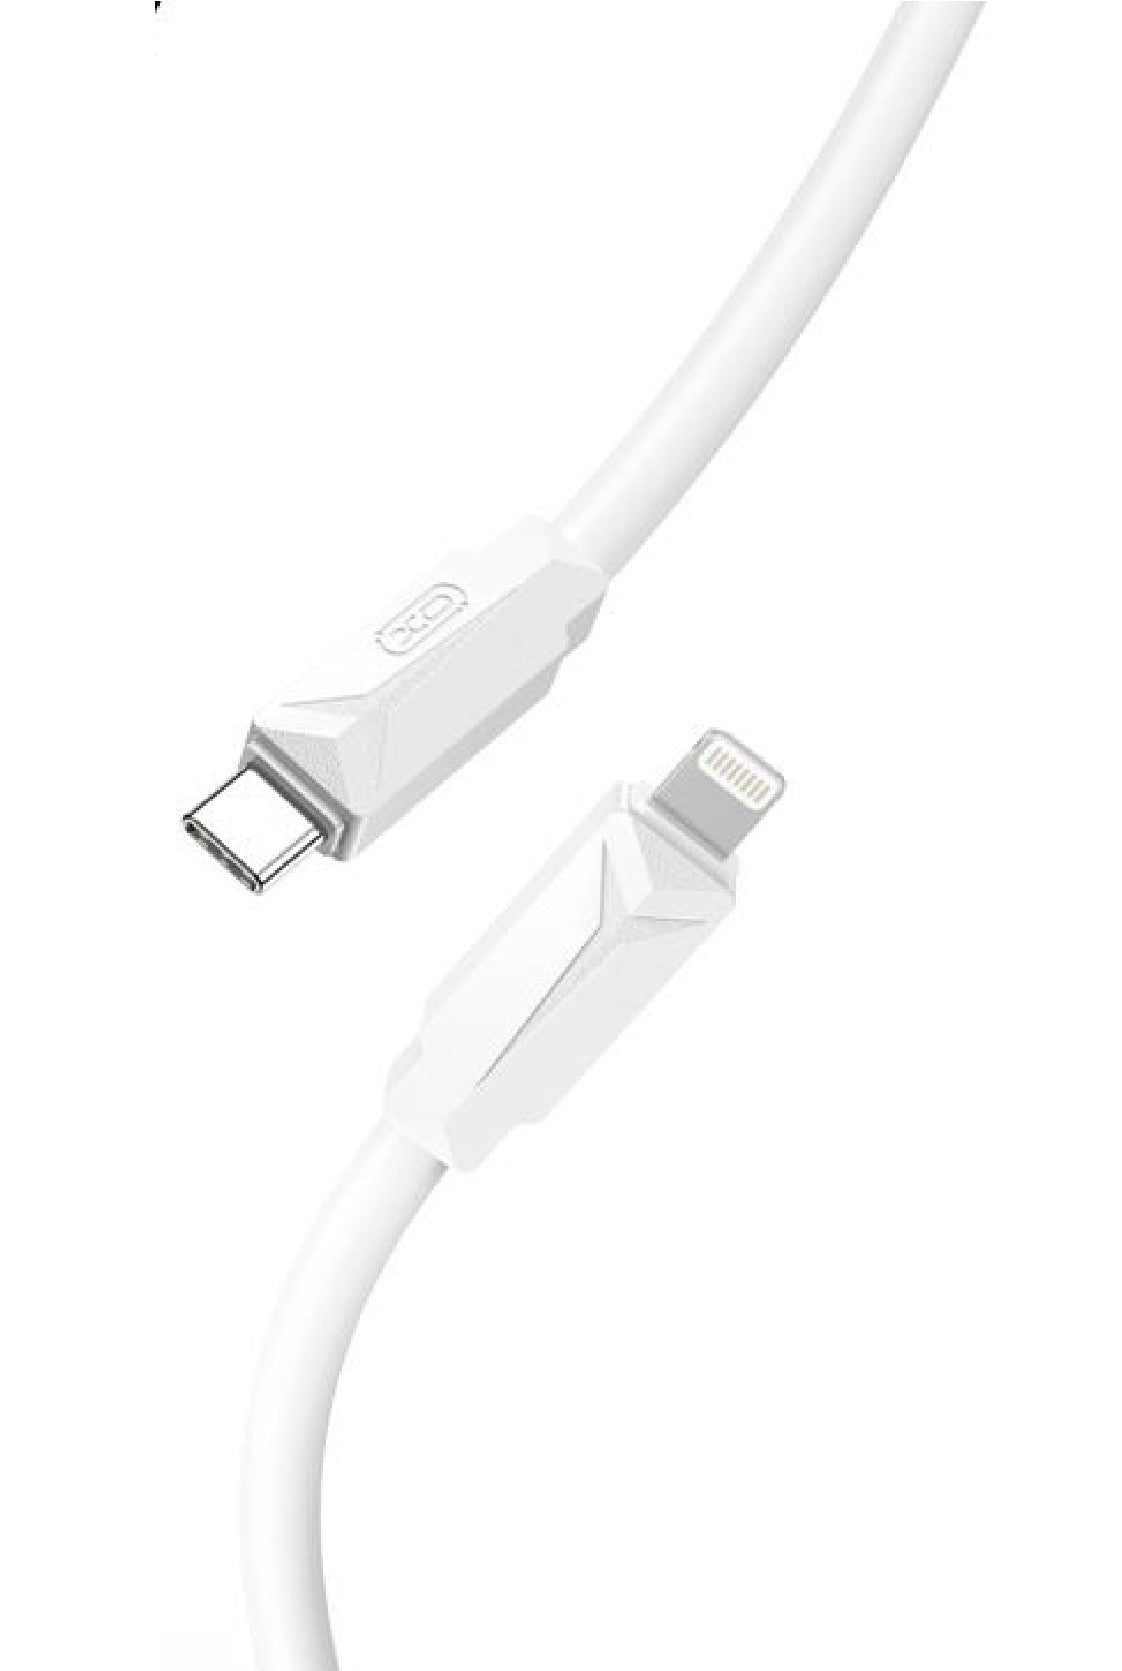 XO Charging Cable Type-C To Lightning (for iPhone)